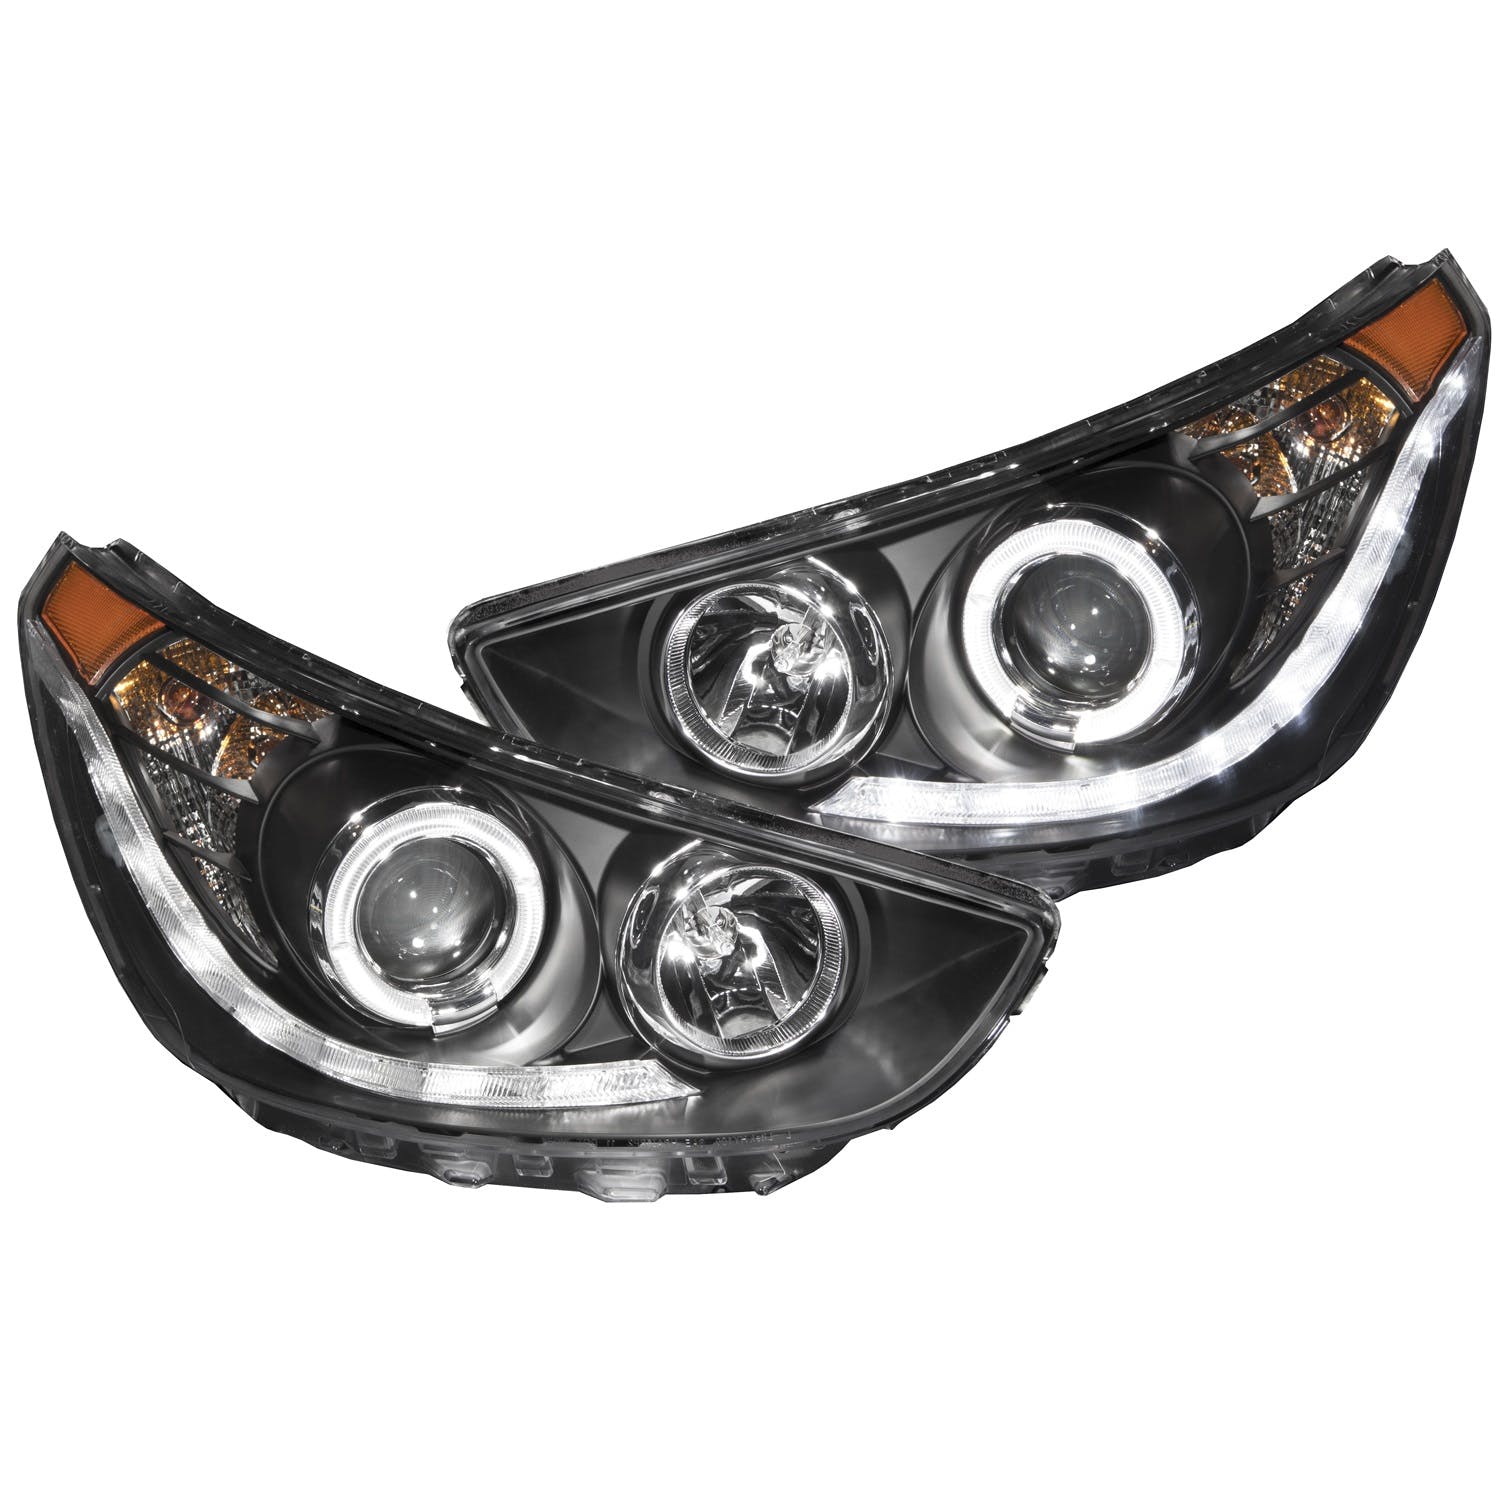 AnzoUSA 121476 Projector Headlights with Halo Black (SMD LED)